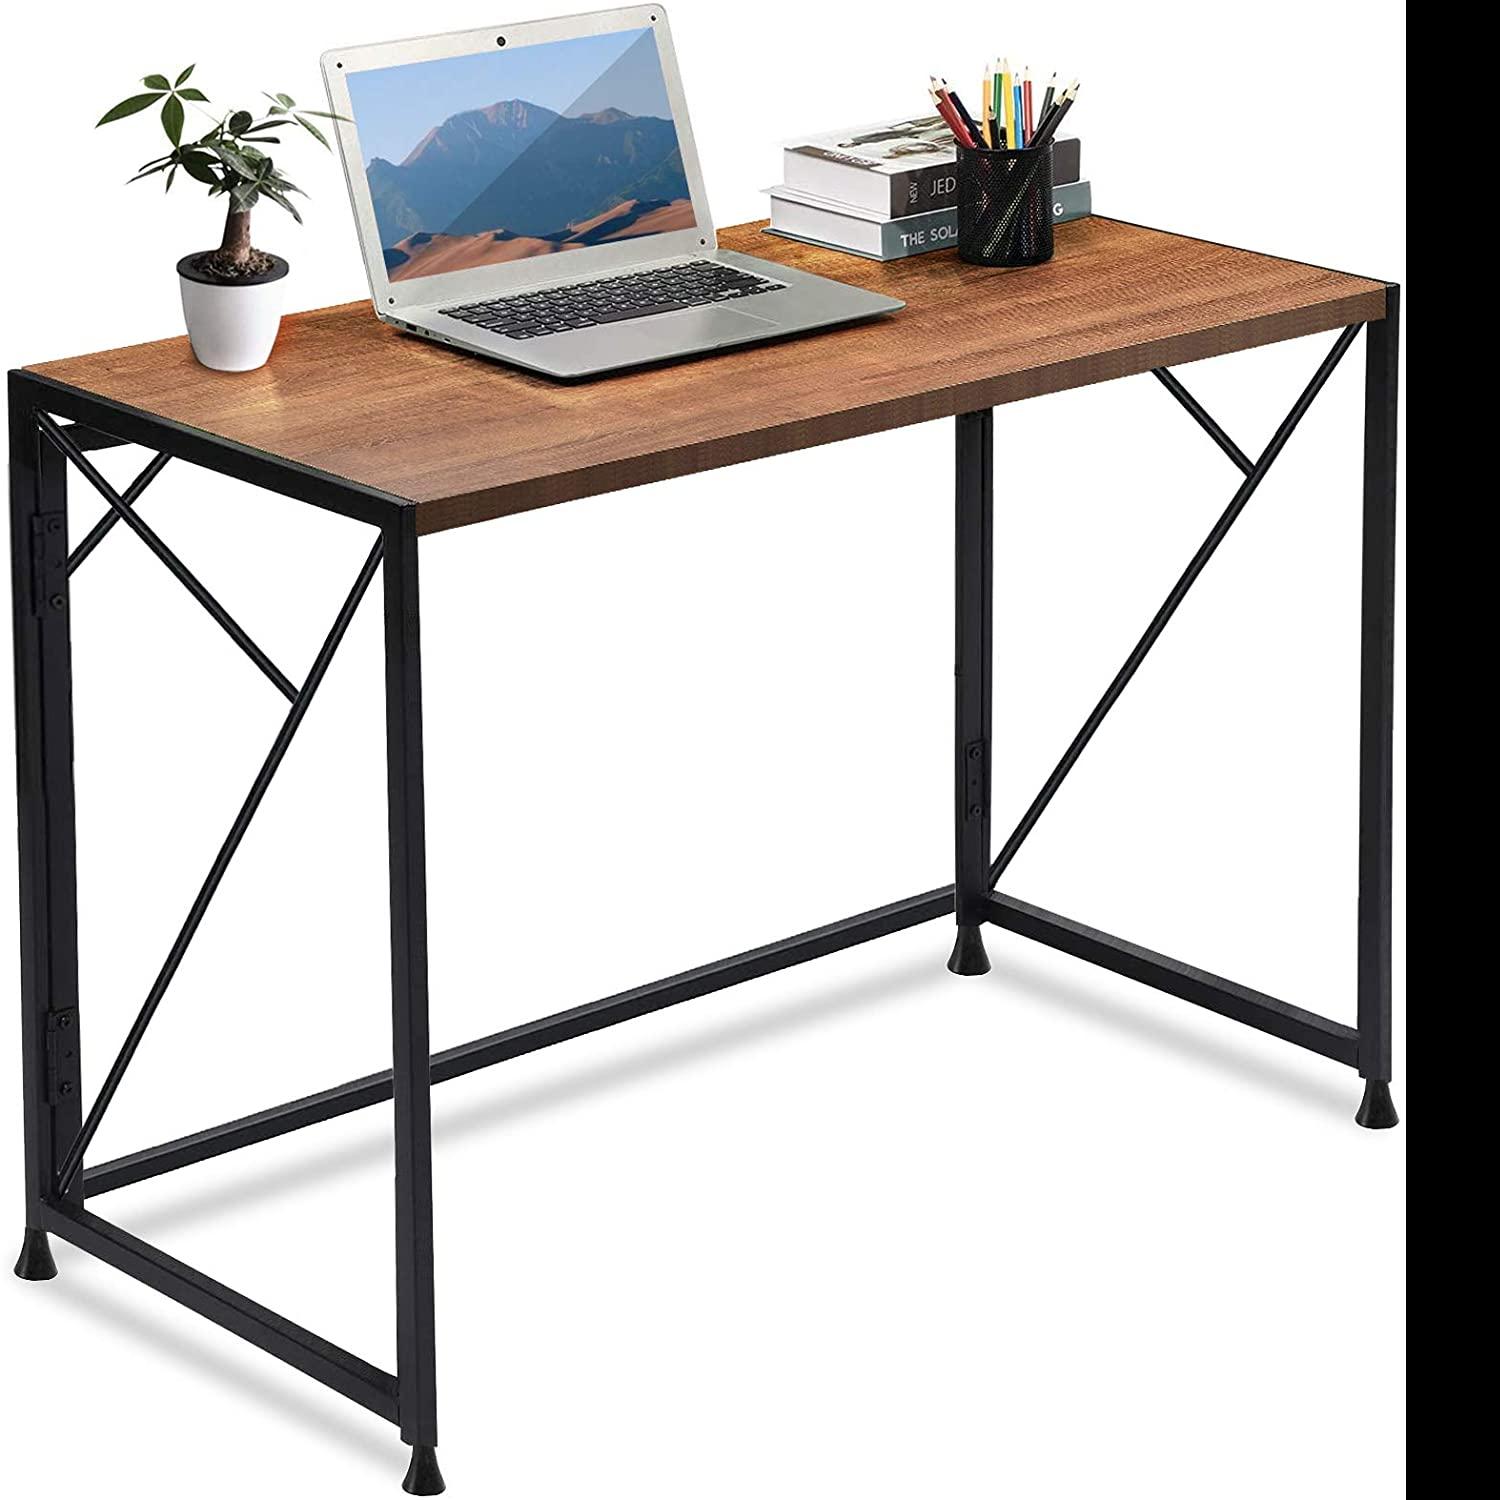 39in ComHoma Computer Office Folding Desk for $41.99 Shipped